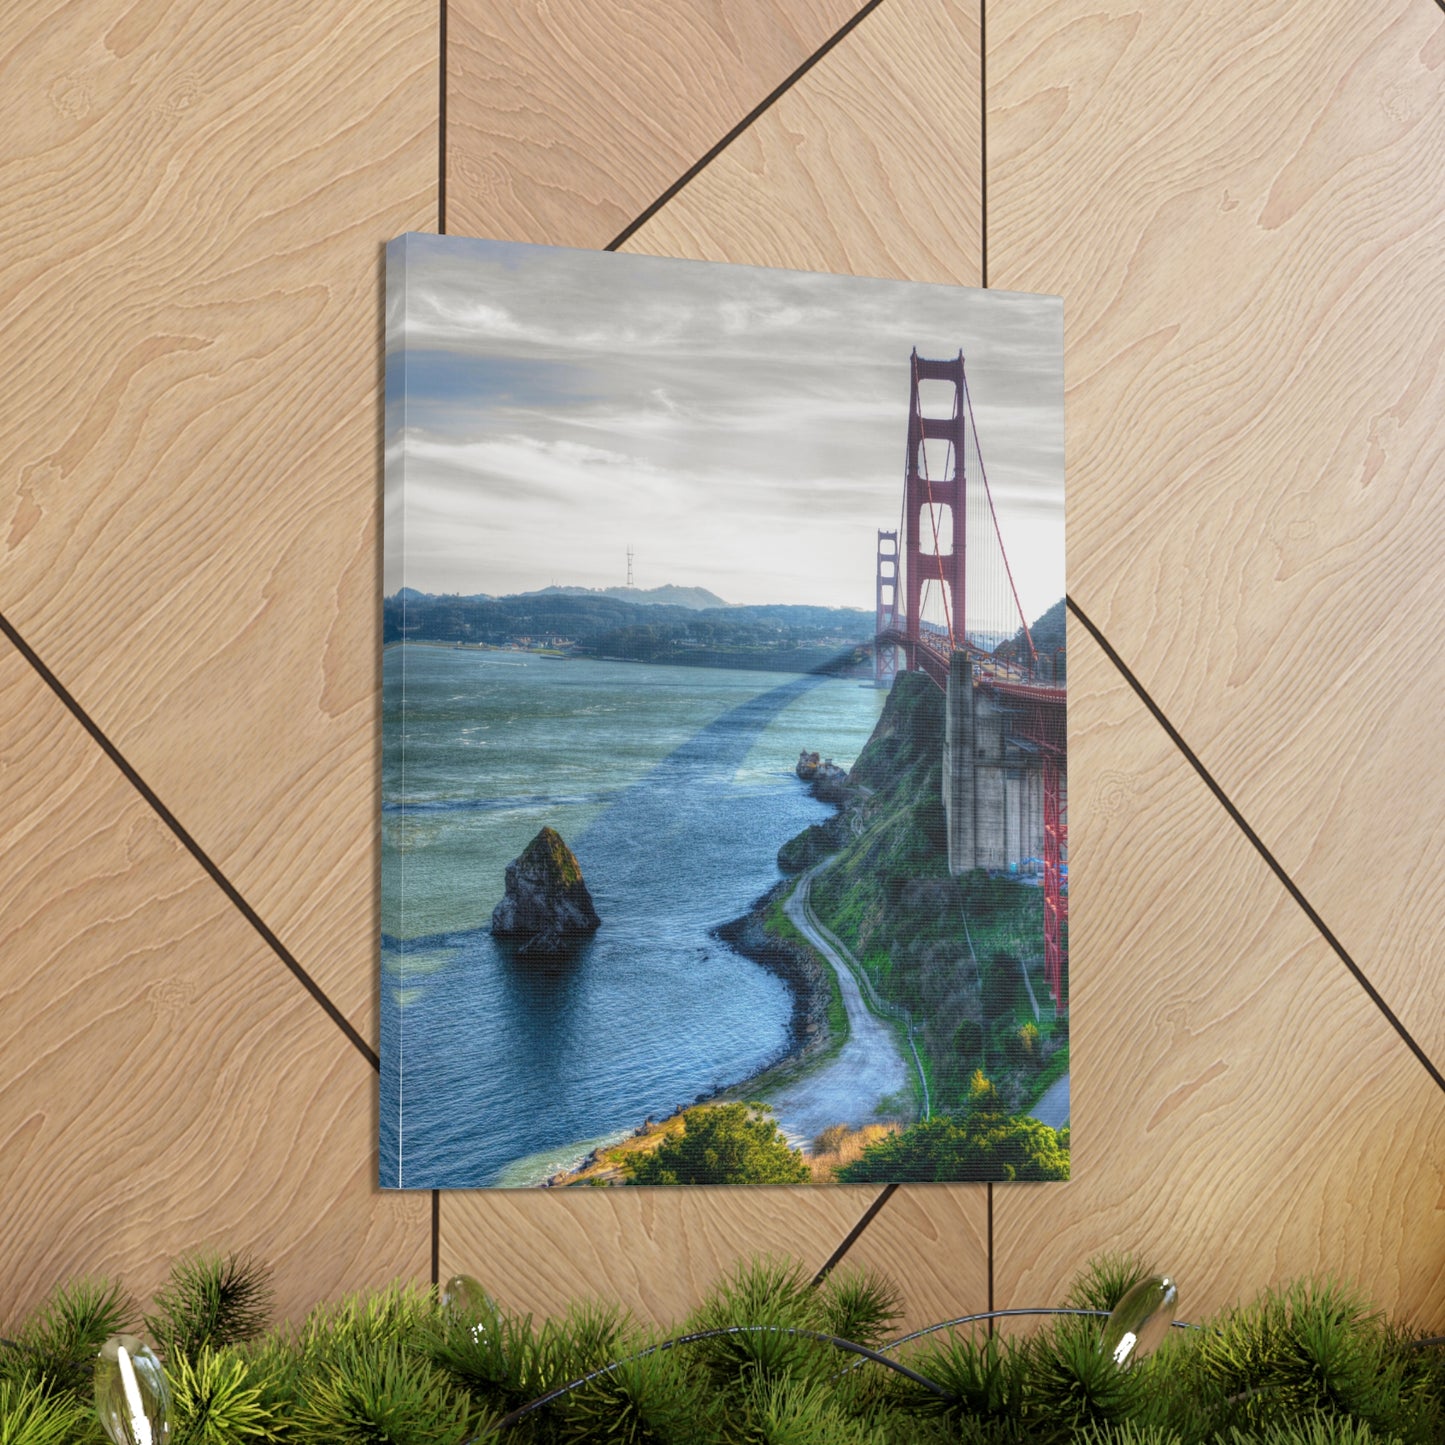 Canvas Print Of The Golden Gate Bridge And Bay In San Francisco For Wall Art